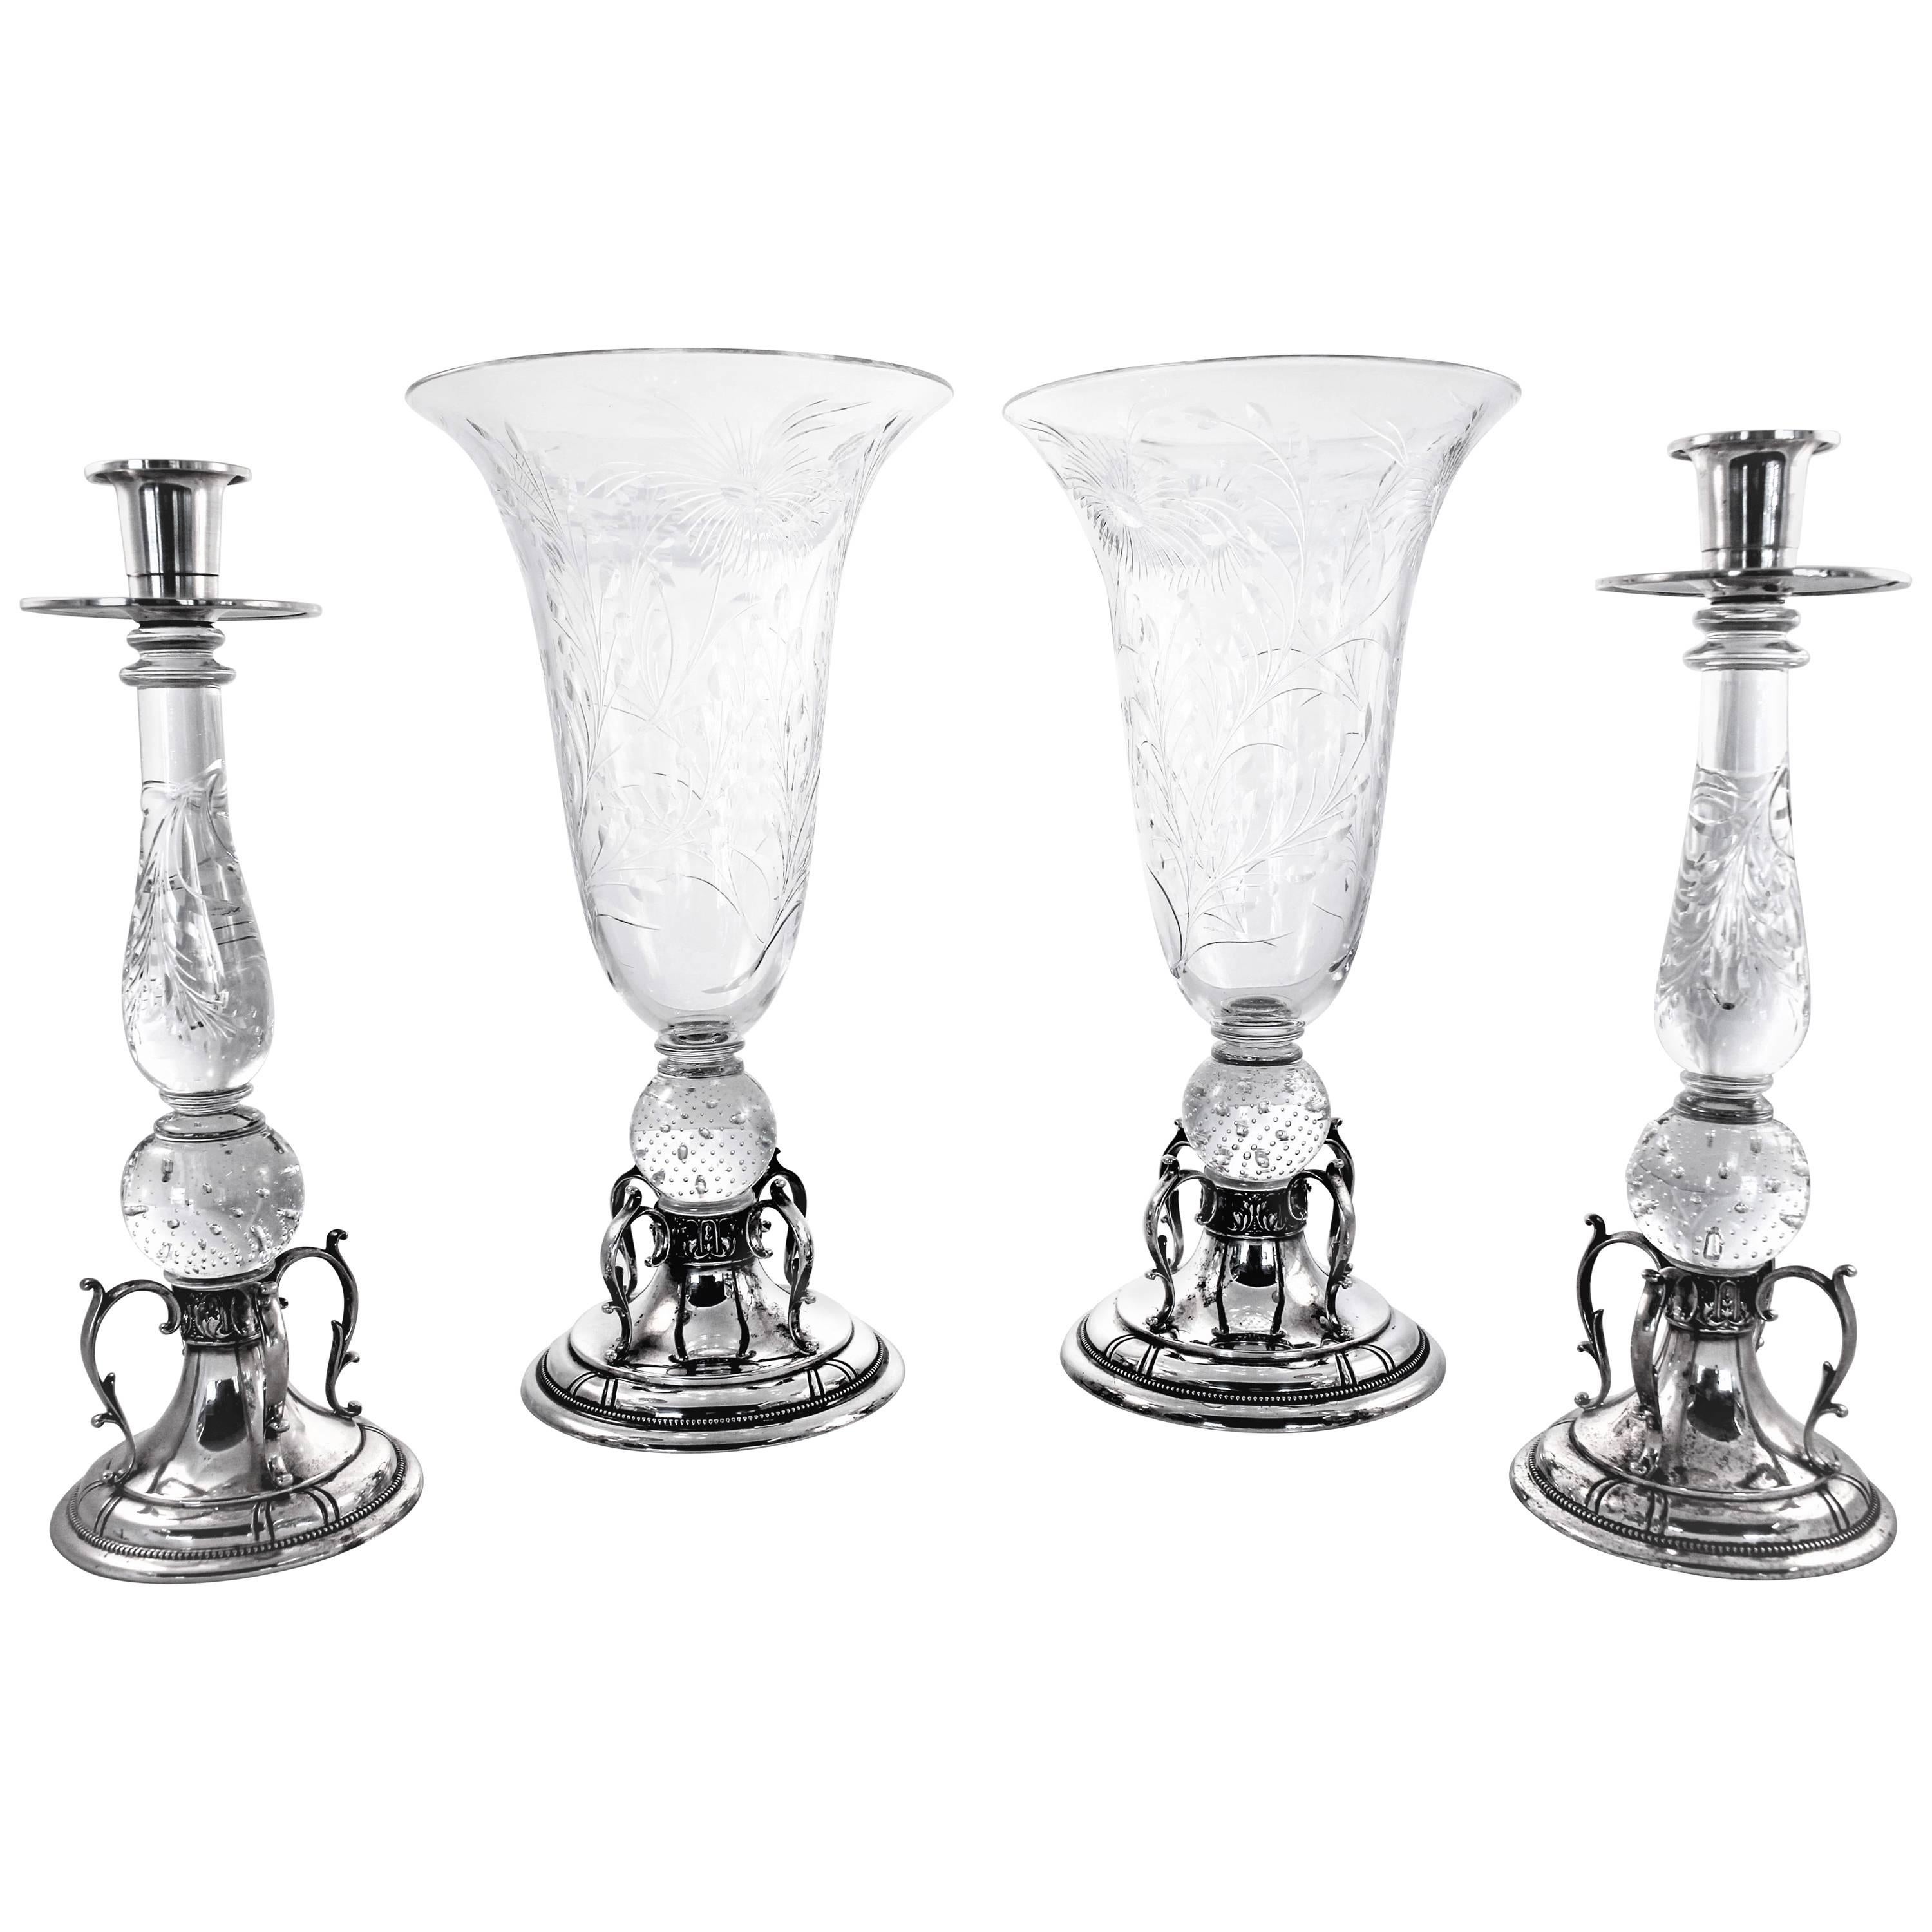 Candlesticks and Matching Vases